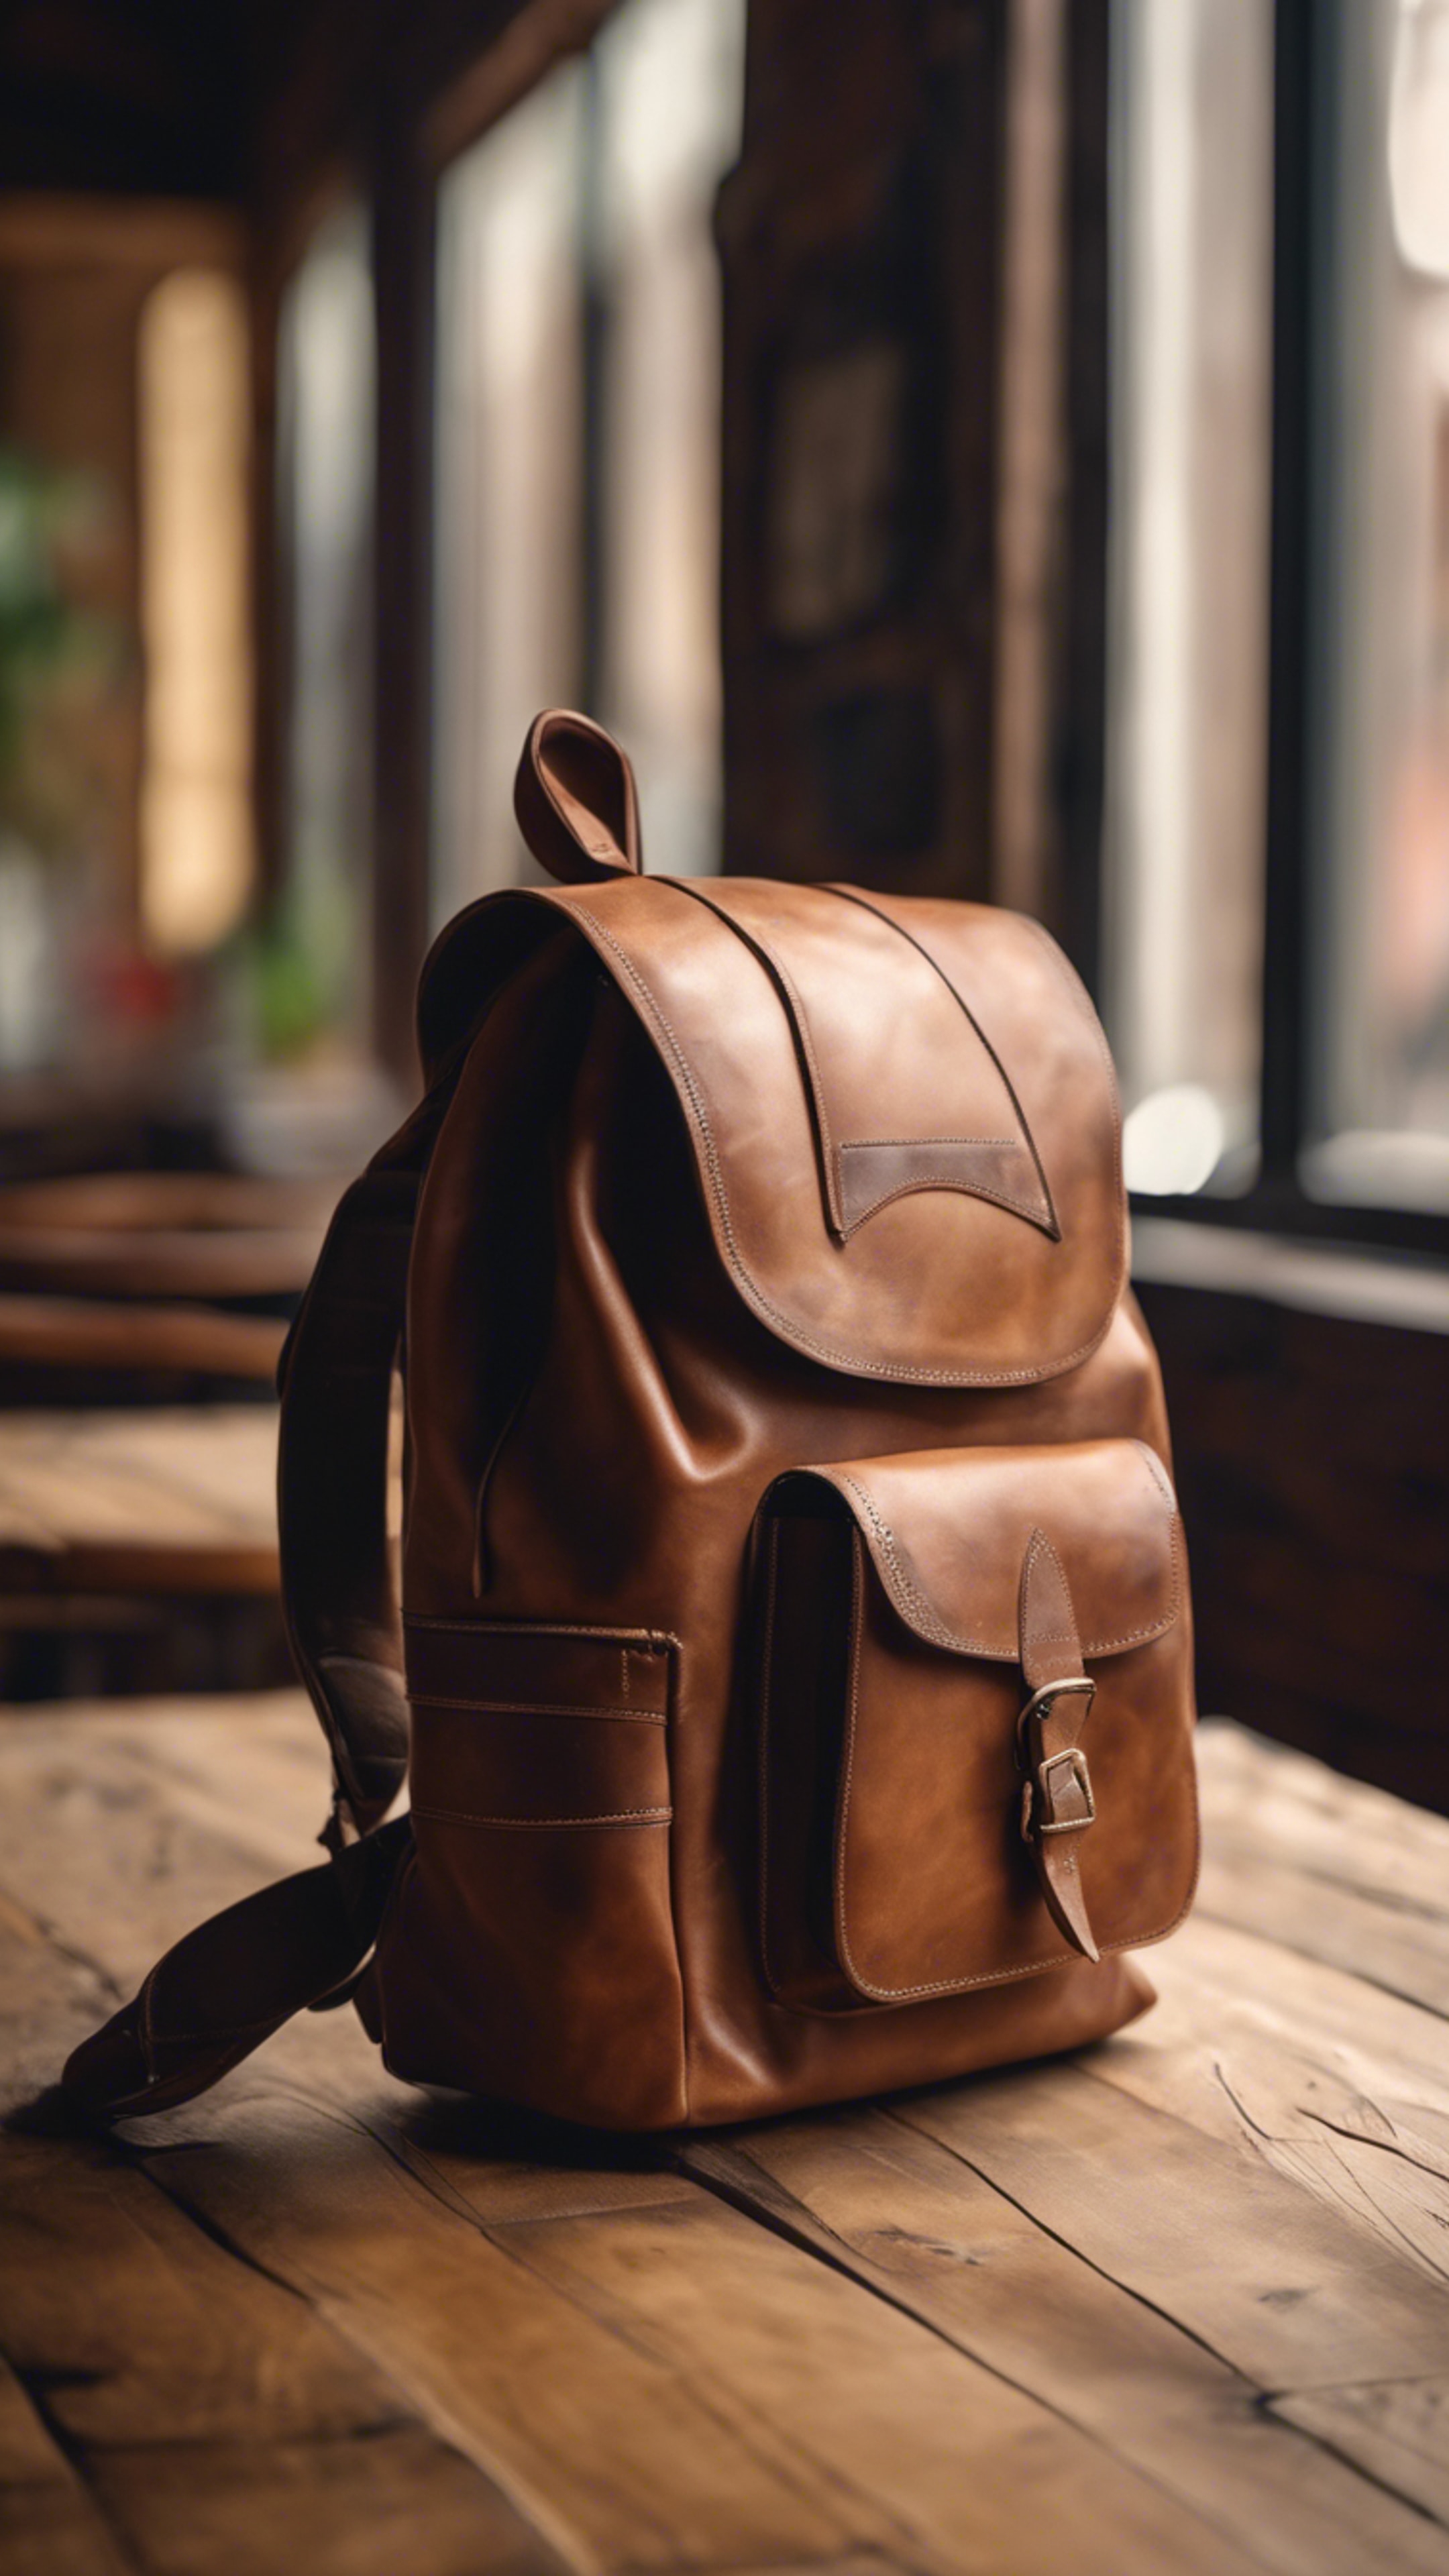 A vintage brown leather backpack sitting on a wooden table in a cozy café.壁紙[7ce12483b5e34217b072]